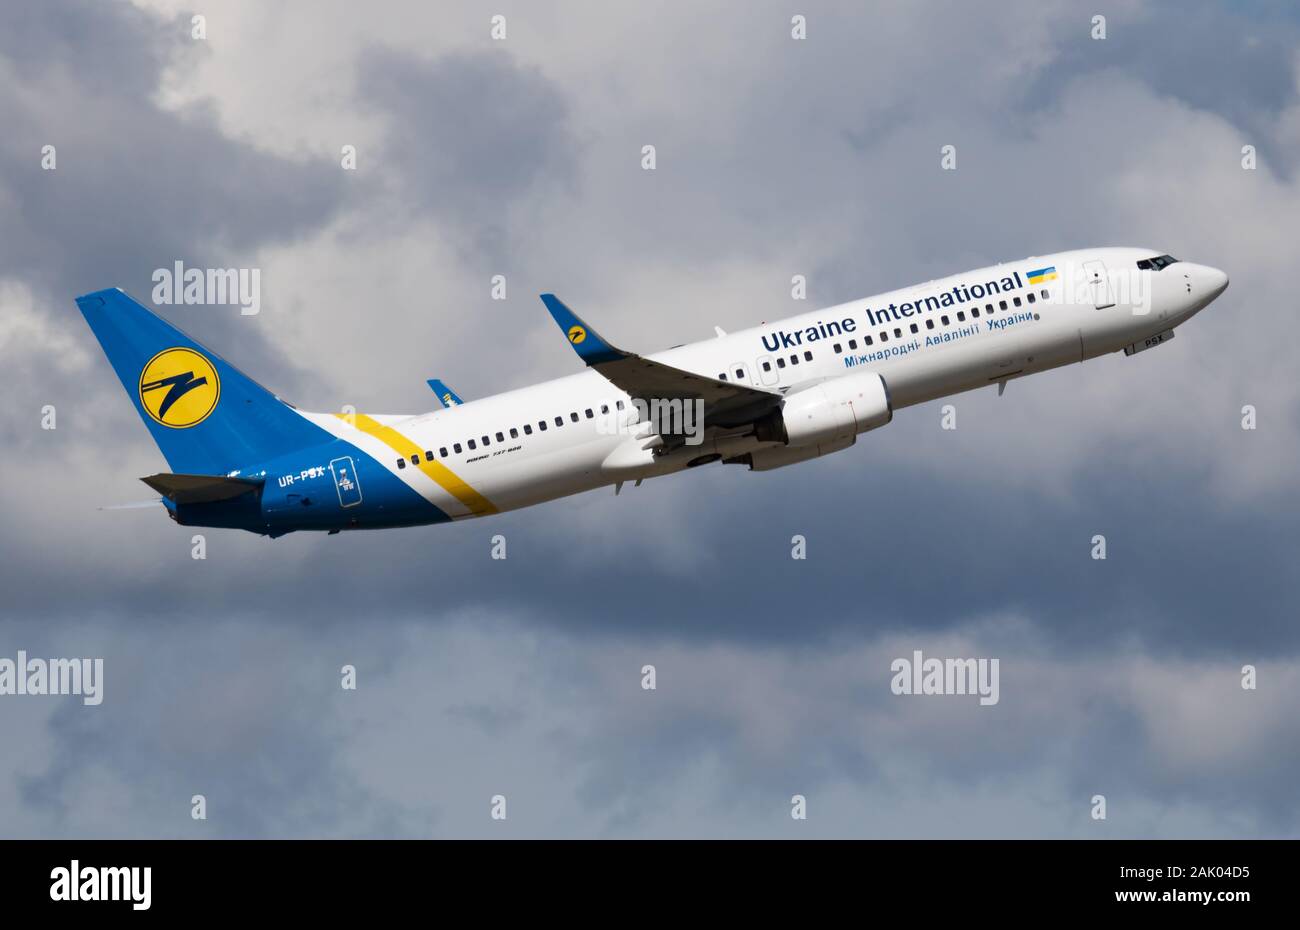 Budapest / Hungary - May 15, 2018: Ukraine International Airlines Boeing 737-800 UR-PSX passenger plane departure and take off at Budapest Airport Stock Photo